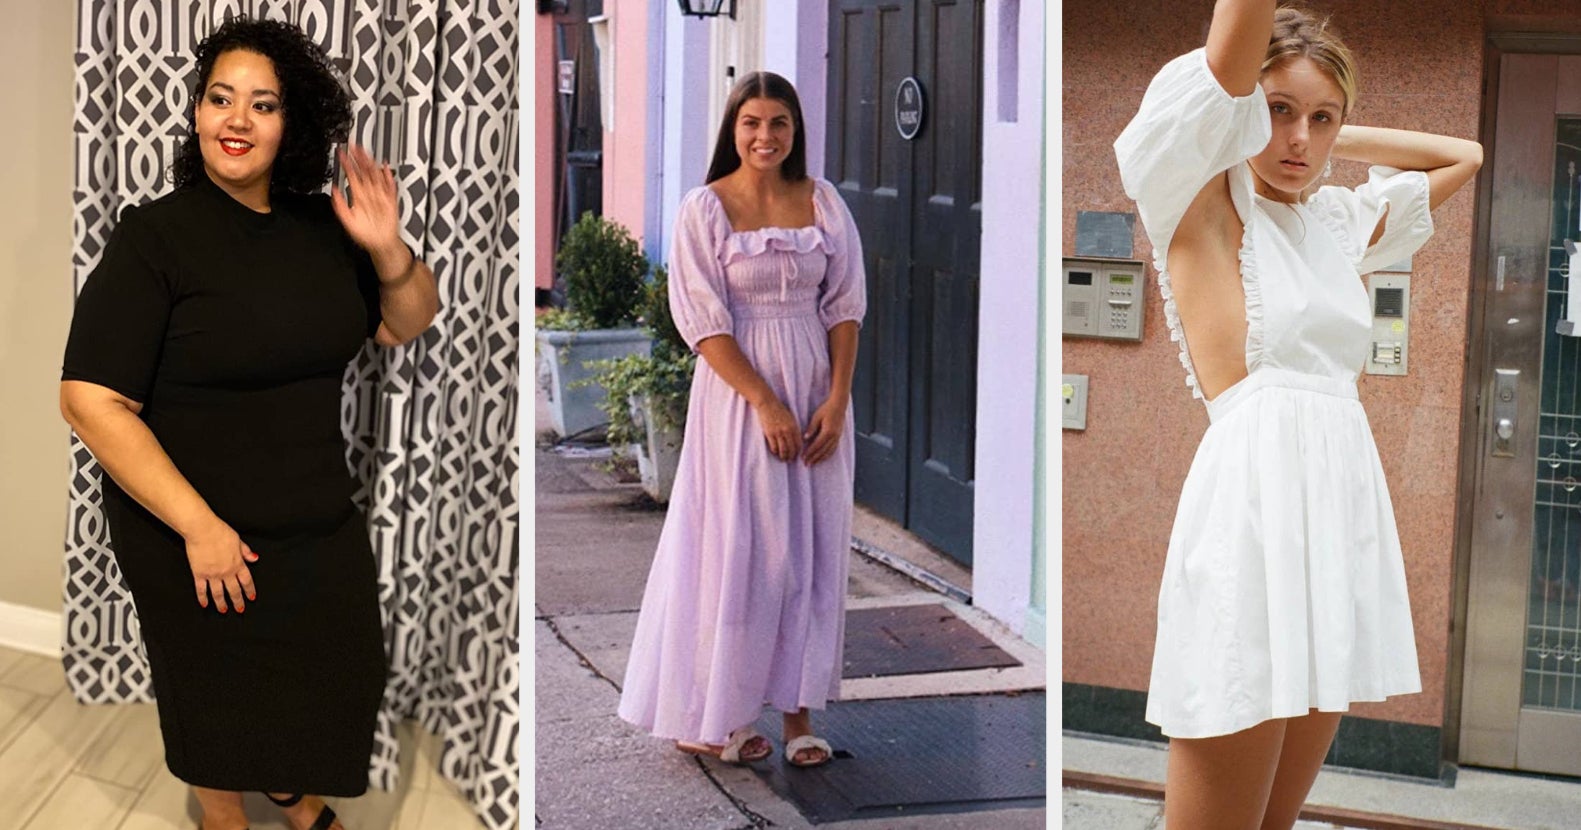 23 Cute Sleeved Dresses To Protect Your Shoulders From The Sun